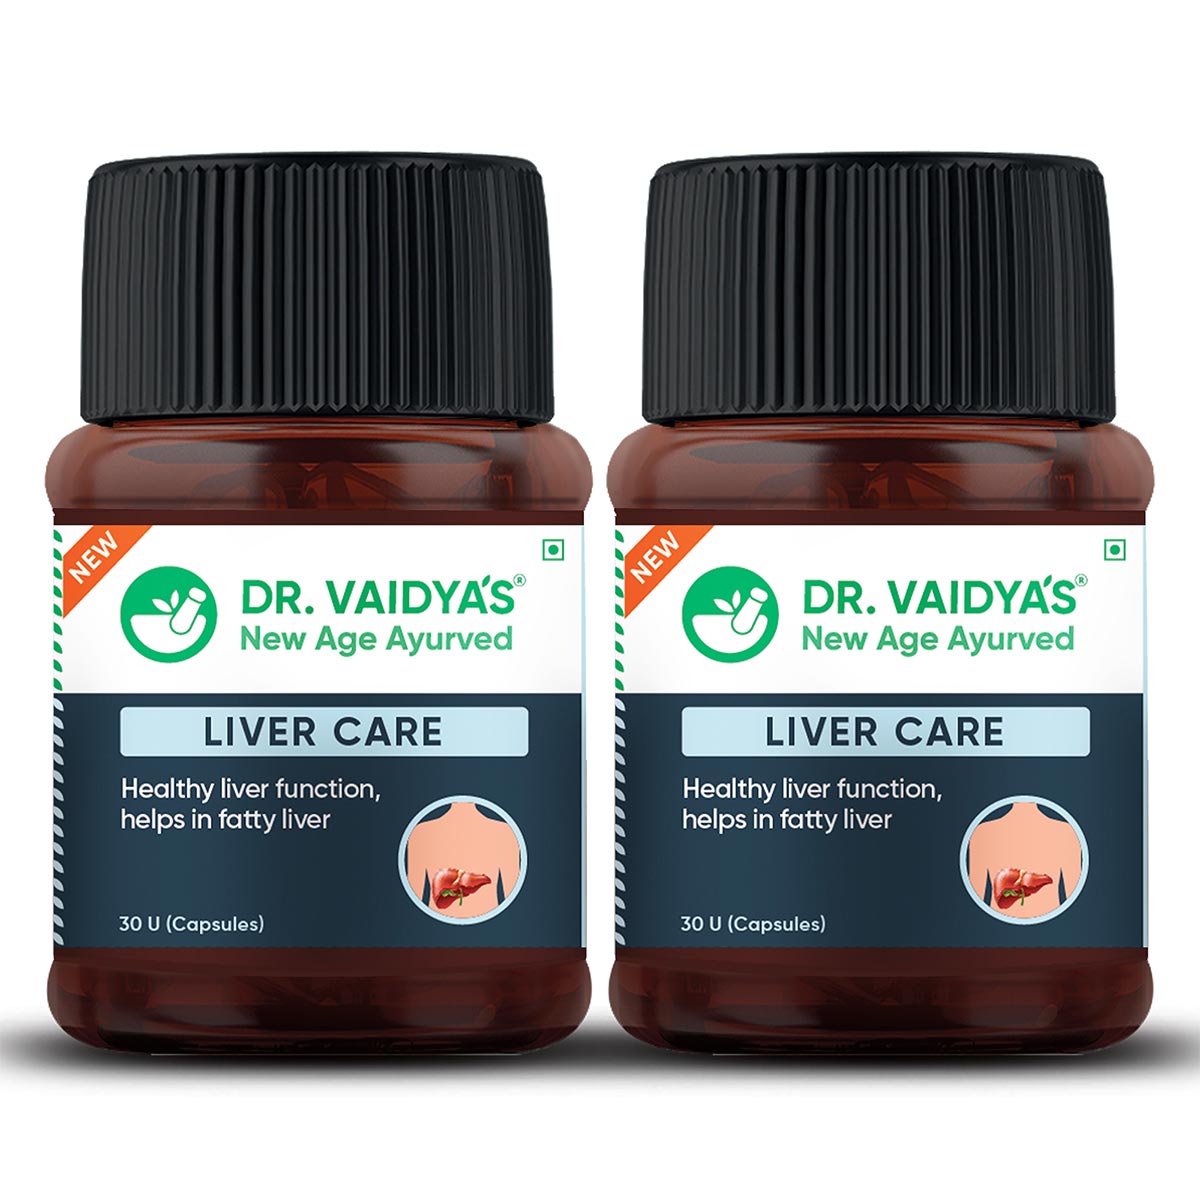 Dr. Vaidya's Liver Care: Helps In Fatty Liver & Daily Liver Detox